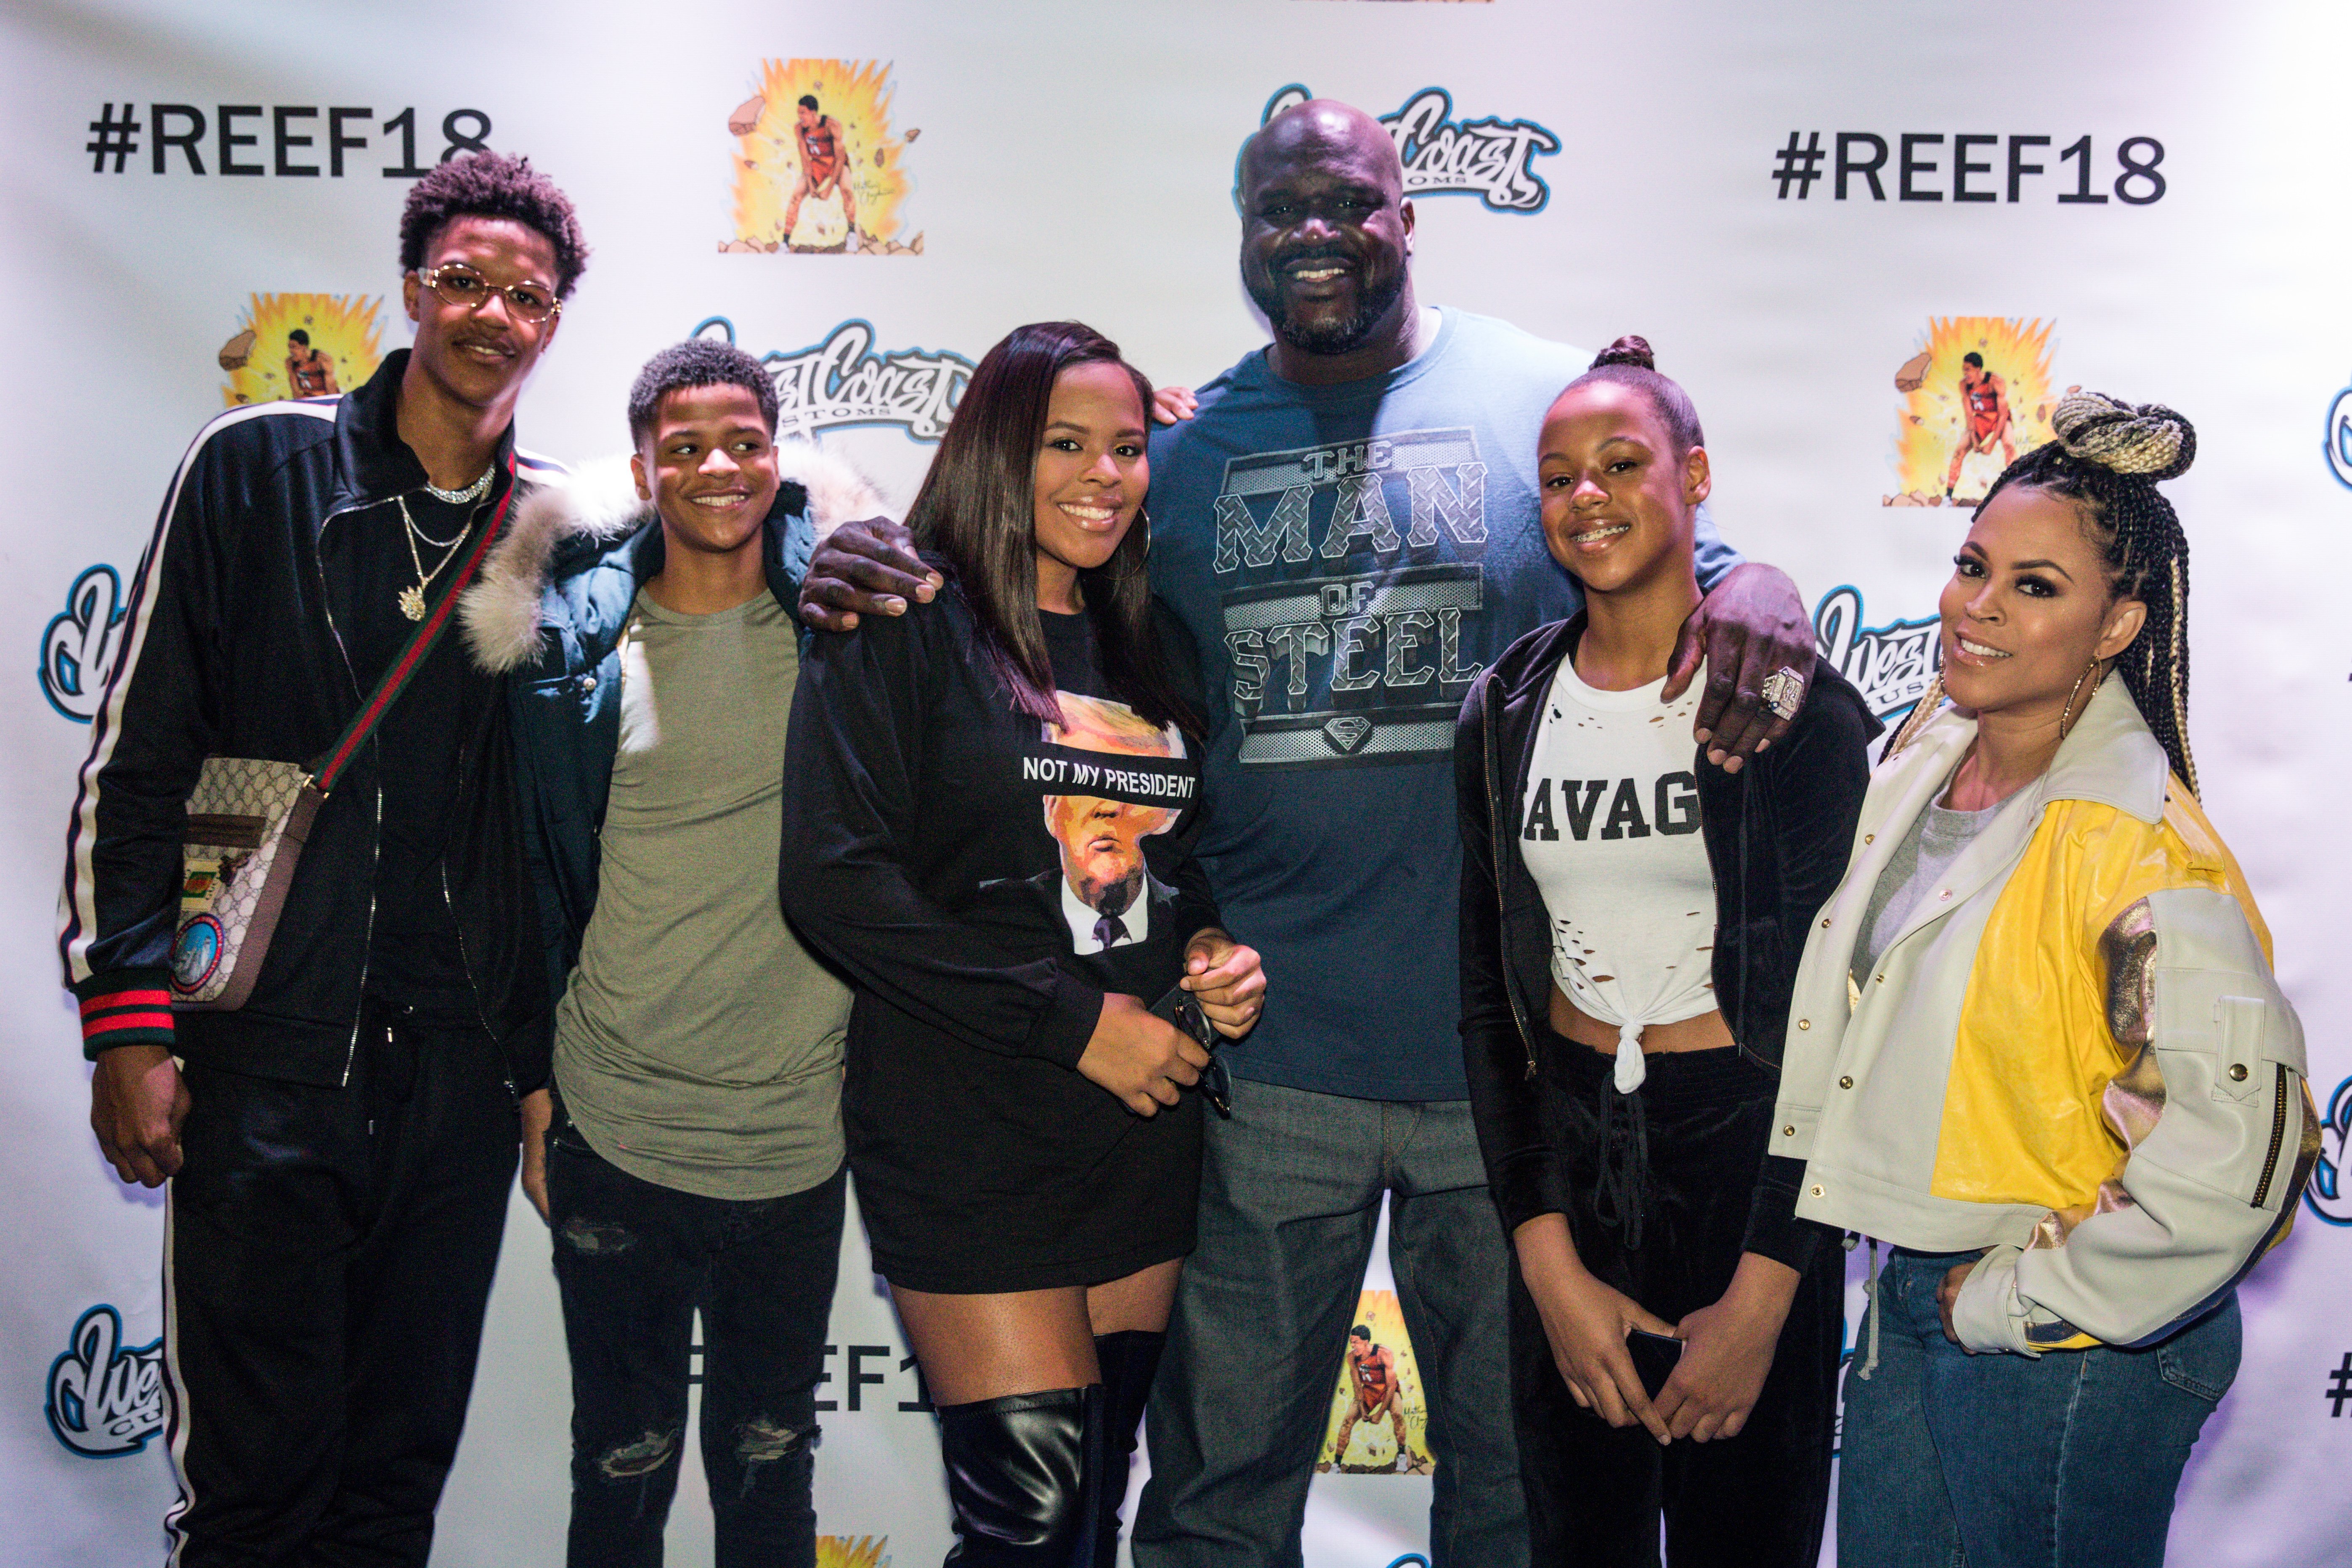 Shaunie and Shaquille O'Neal pose with their children on Shareef's 18th birthday party at West Coast Customs on January 13, 2018 in Burbank, California. | Source: Getty Images